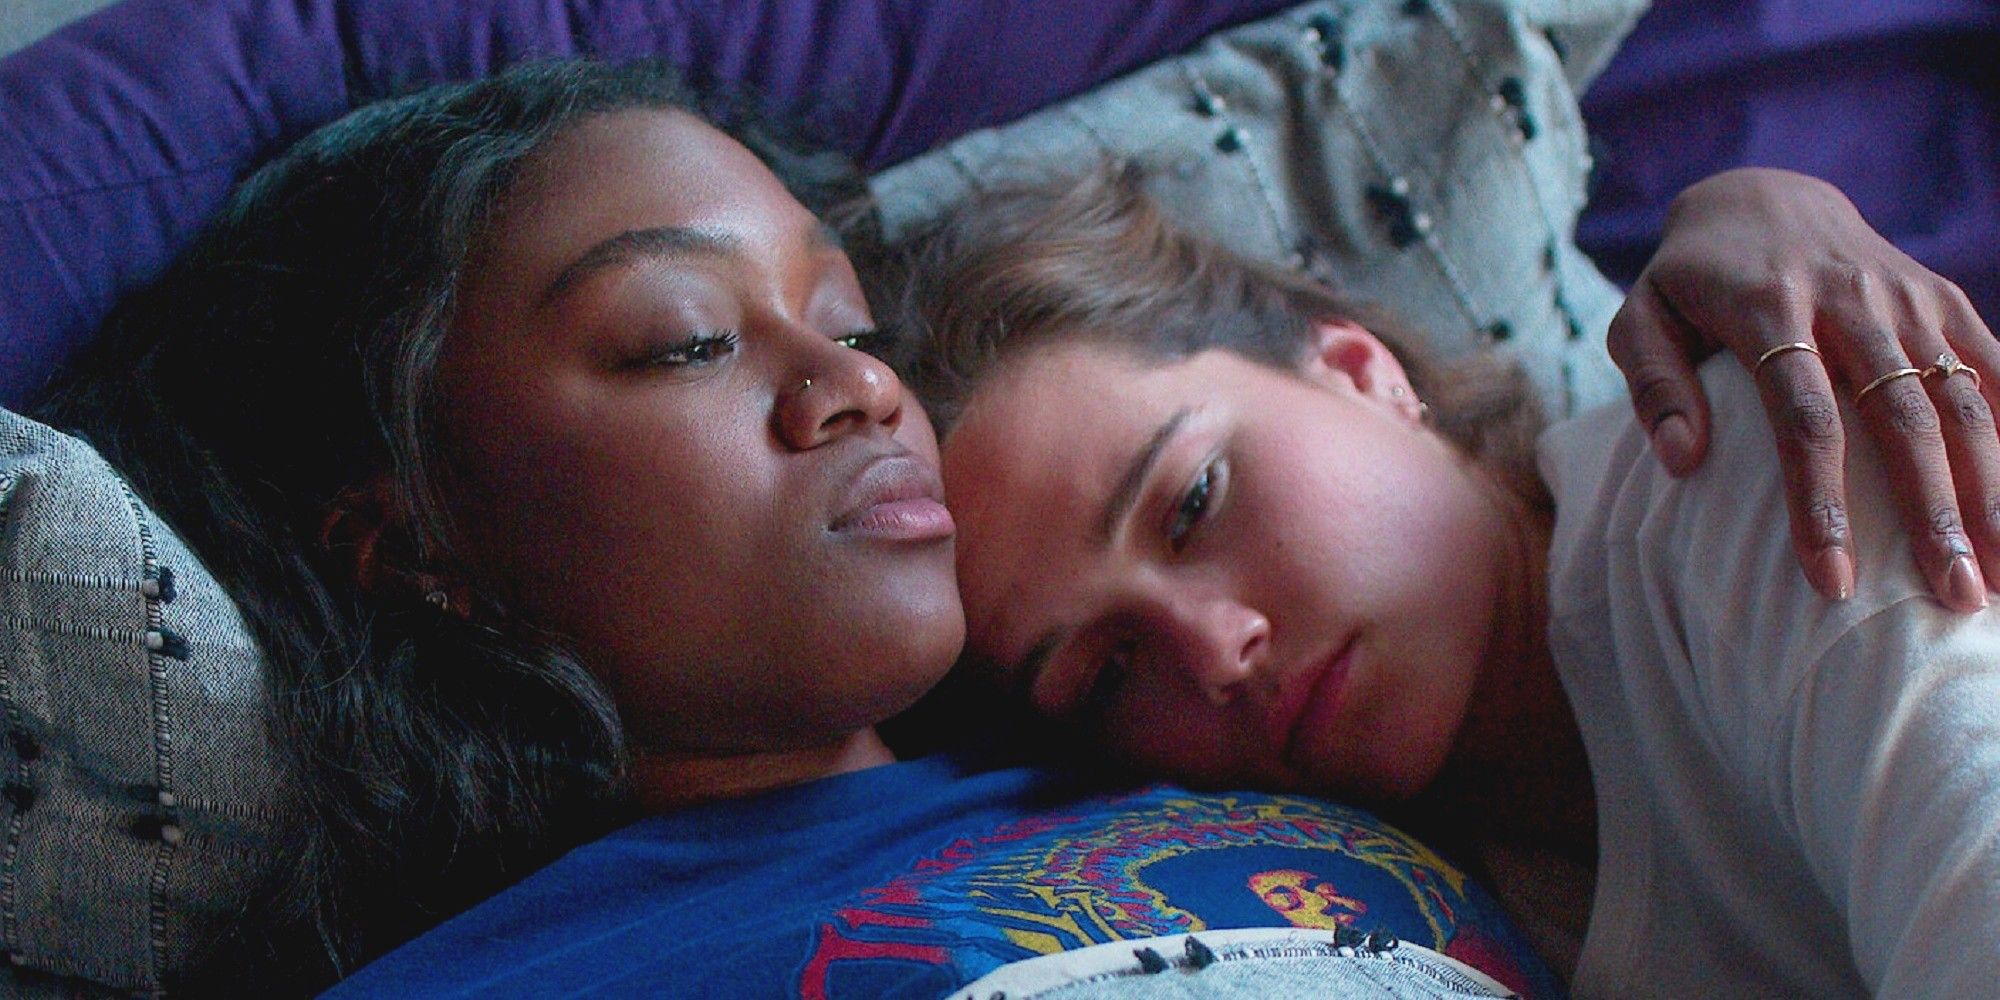 Two teen girls lying in bed holding each other